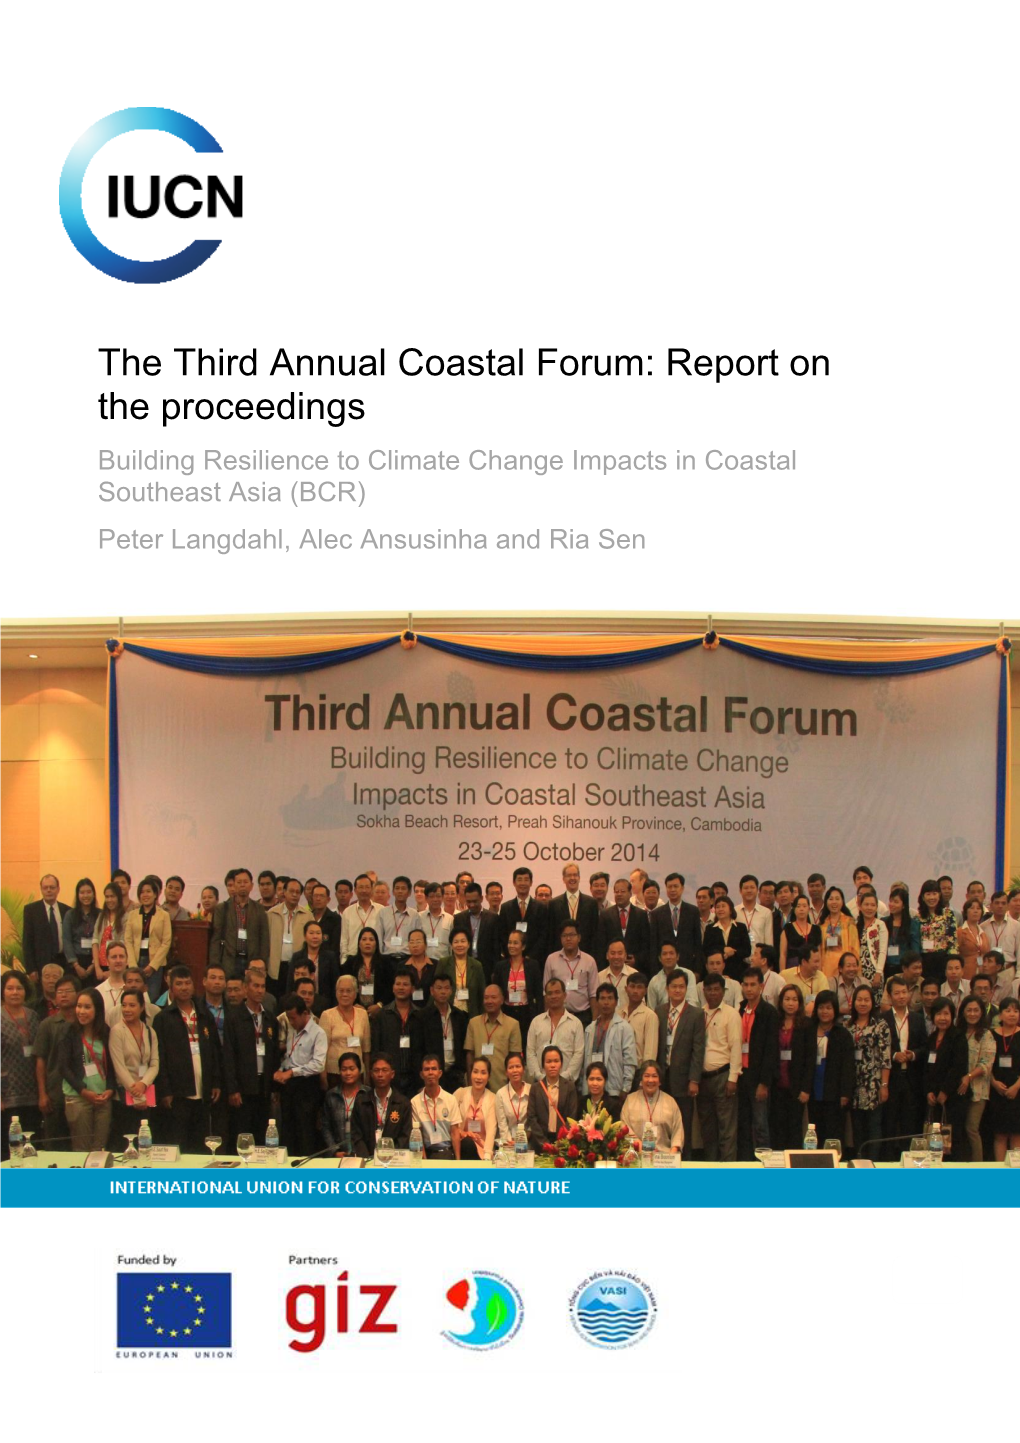 The Third Annual Coastal Forum: Report on the Proceedings Building Resilience to Climate Change Impacts in Coastal Southeast Asia (BCR)